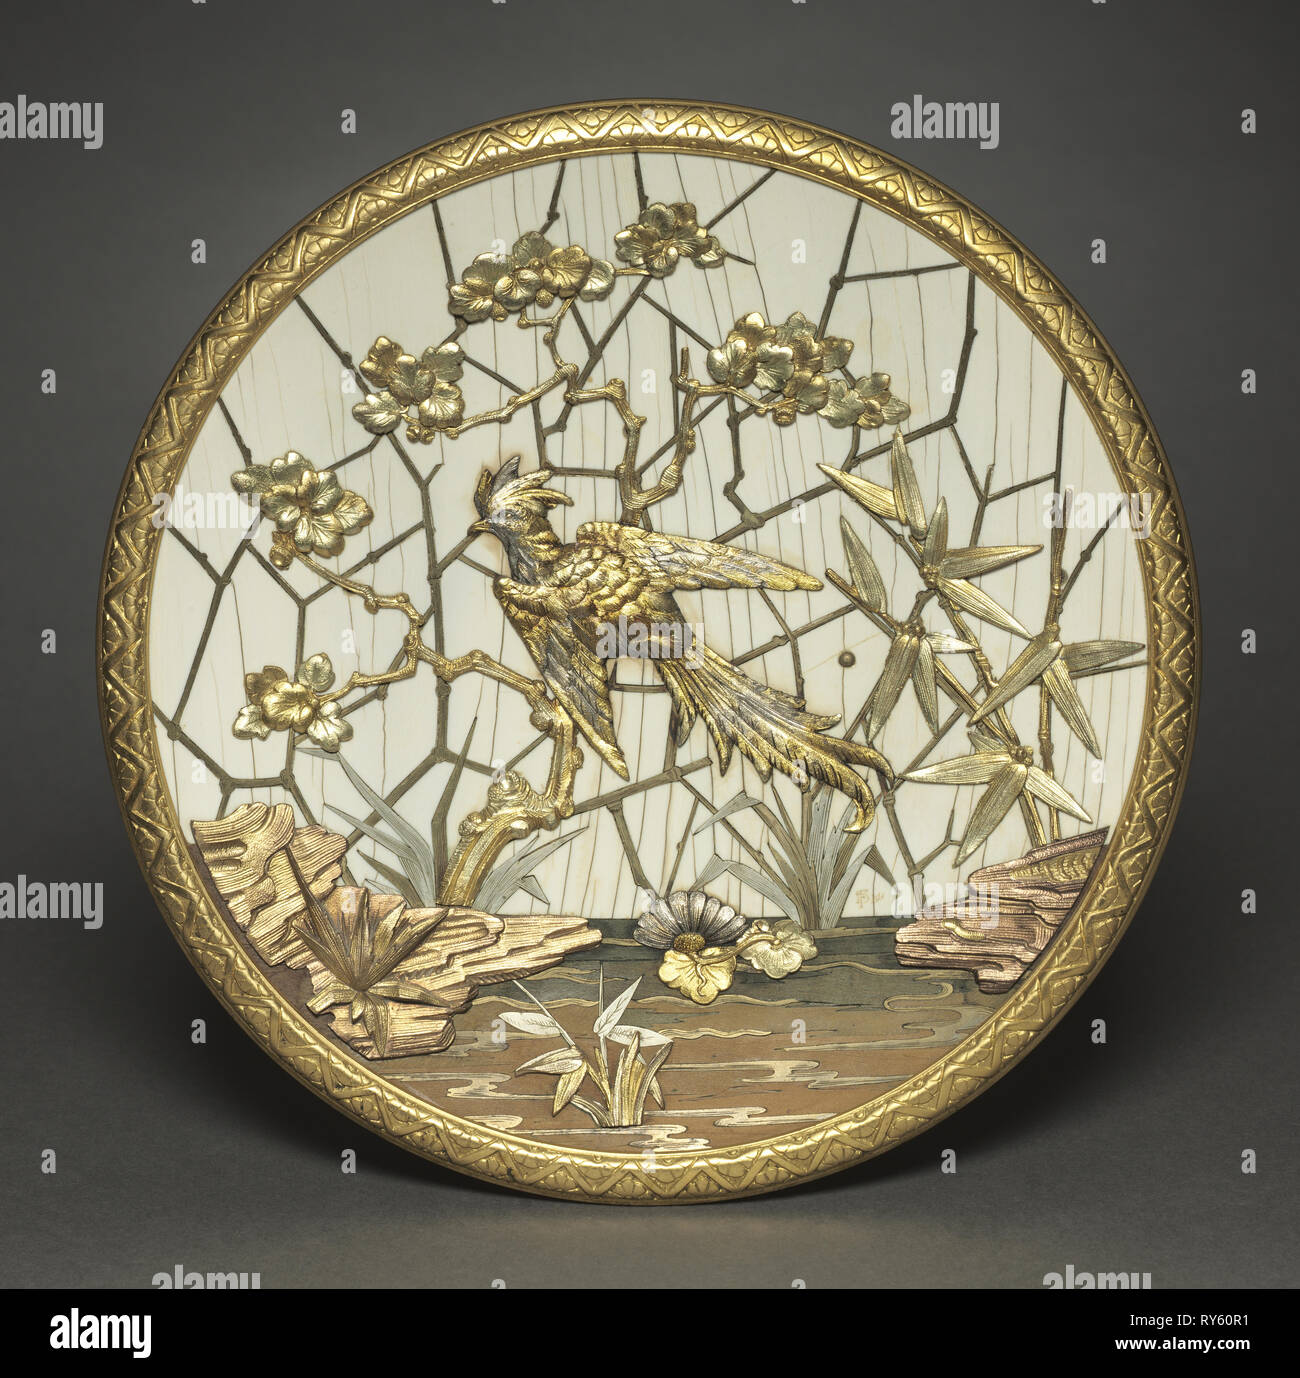 Plaque, c. 1880. Veuve Ferdinand Duvinage (French), Alphonse Giroux (French). Metal gilded in several colors of gold, silver-colored metal, ivory, wood; diameter: 26.9 cm (10 9/16 in Stock Photo